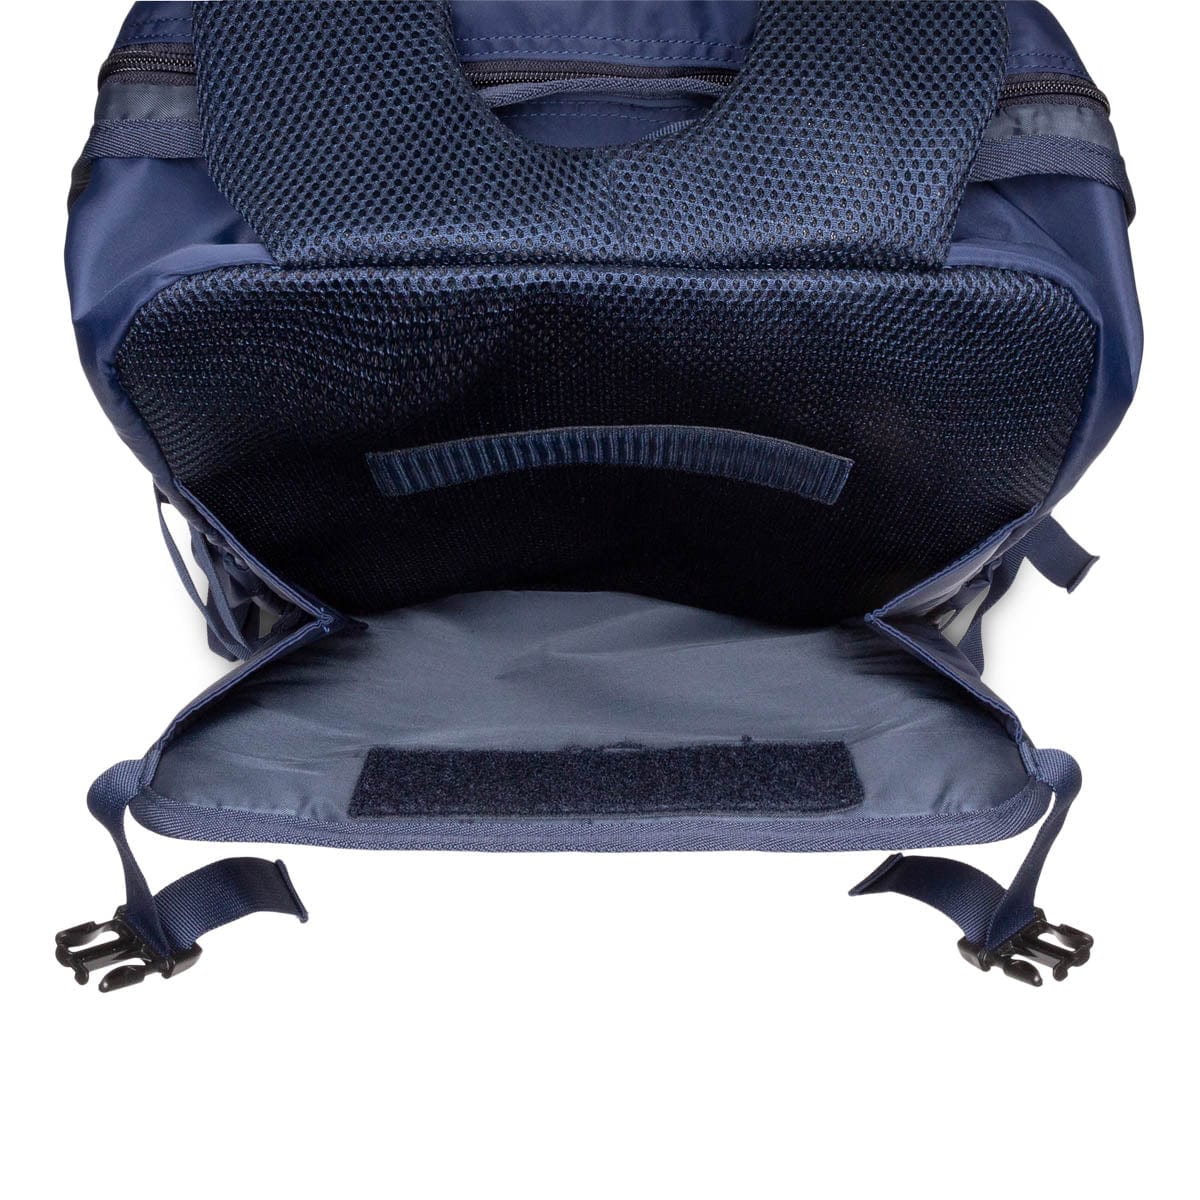 Human Made Bags NAVY / O/S MILITARY BACK PACK